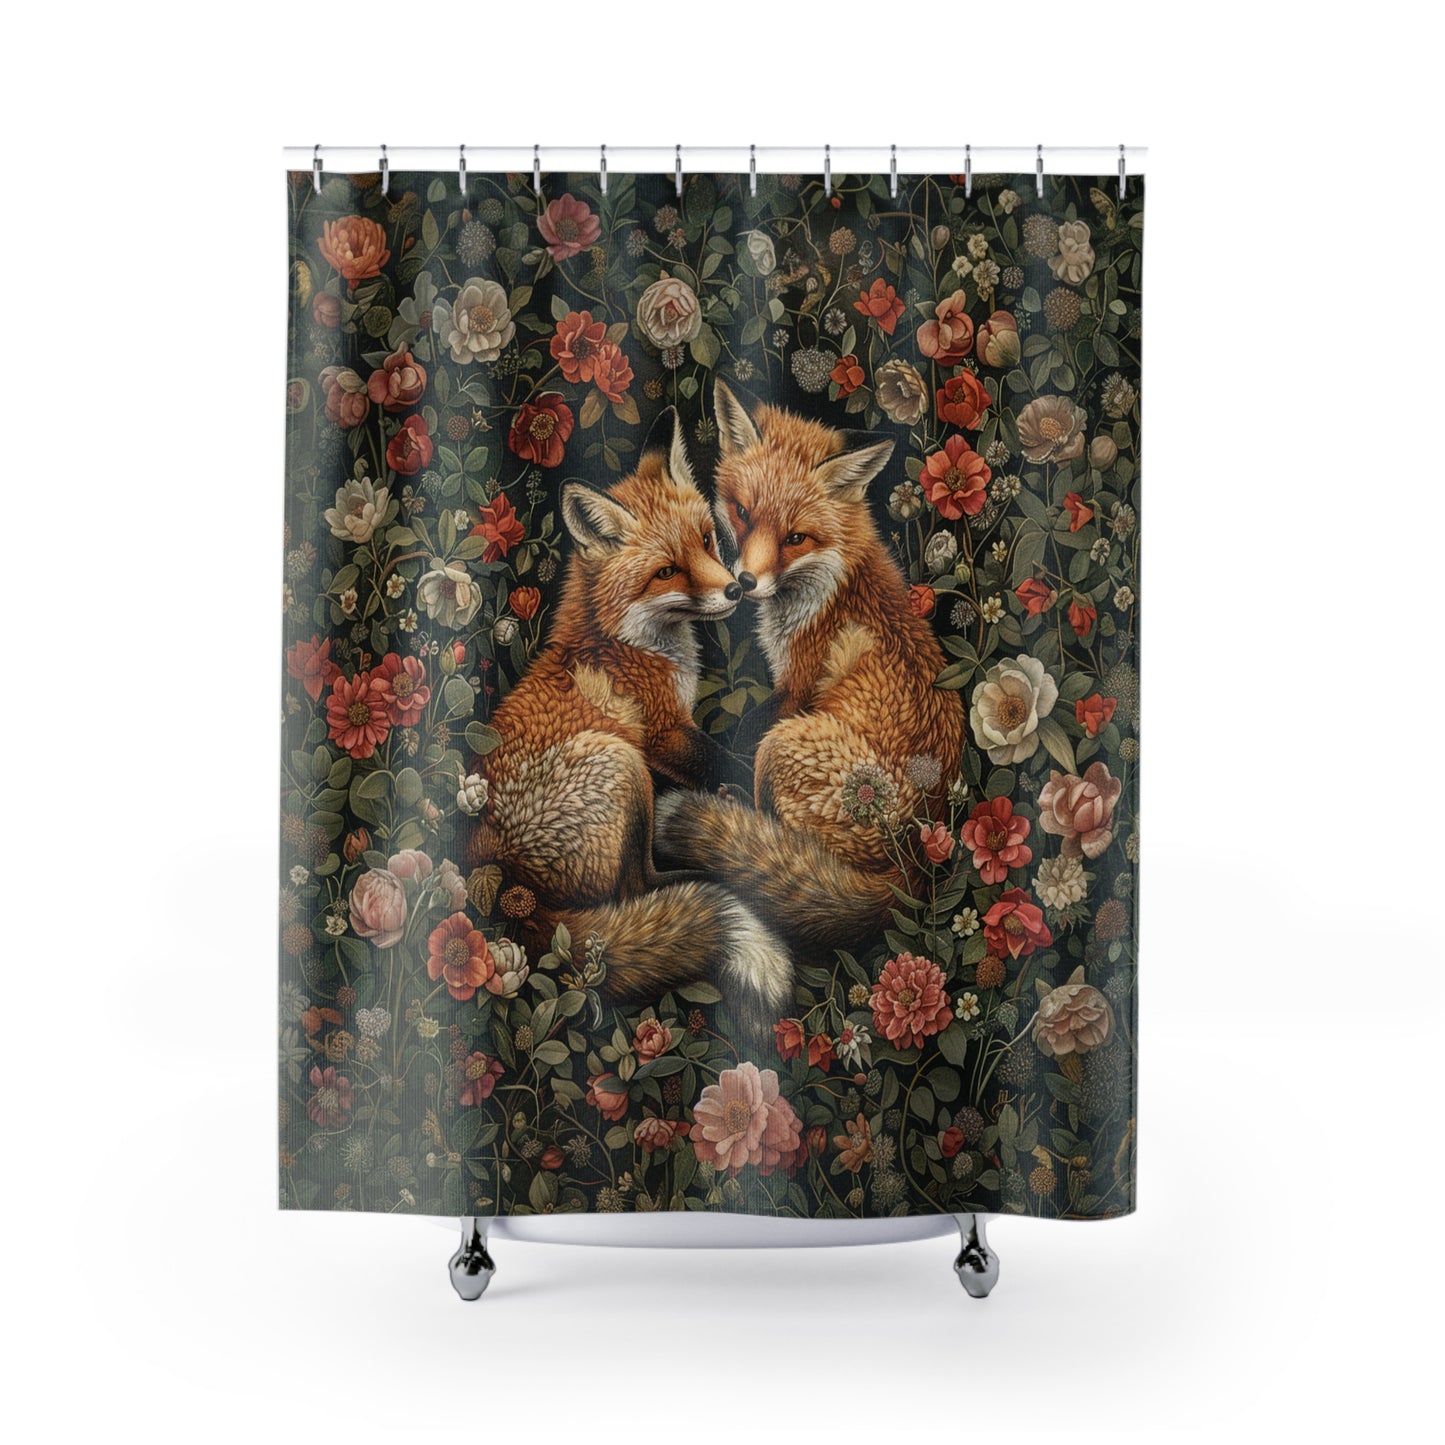 Fox Couple Floral Shower Curtain William Morris Inspired Home Decor Shower Curtain 71" x 74"